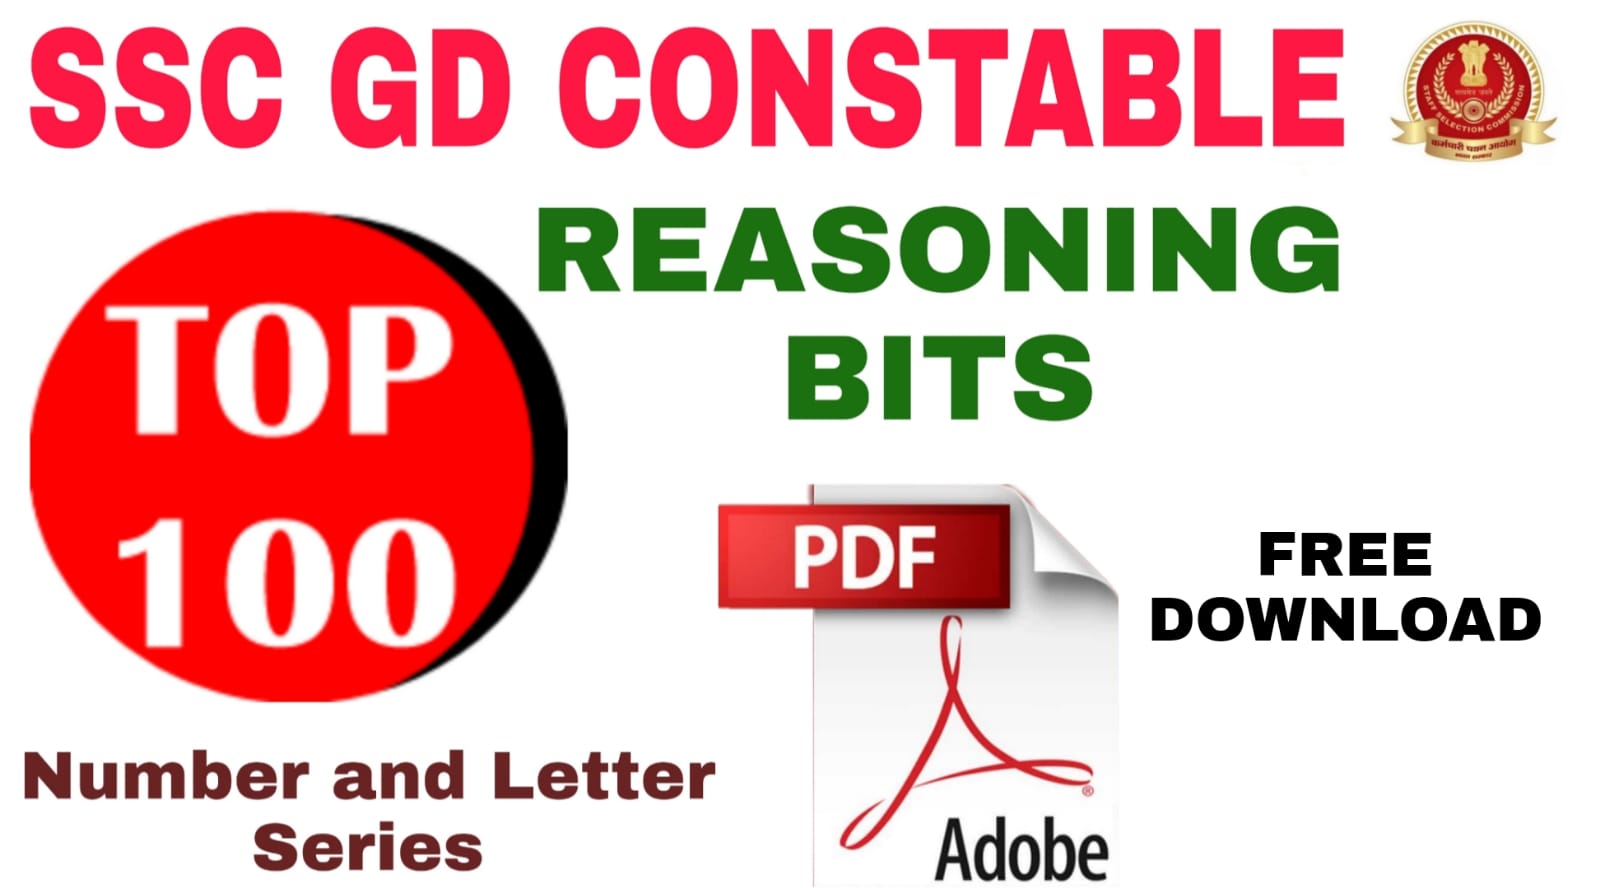 SSC GD Number and Letter Series 100 Bits